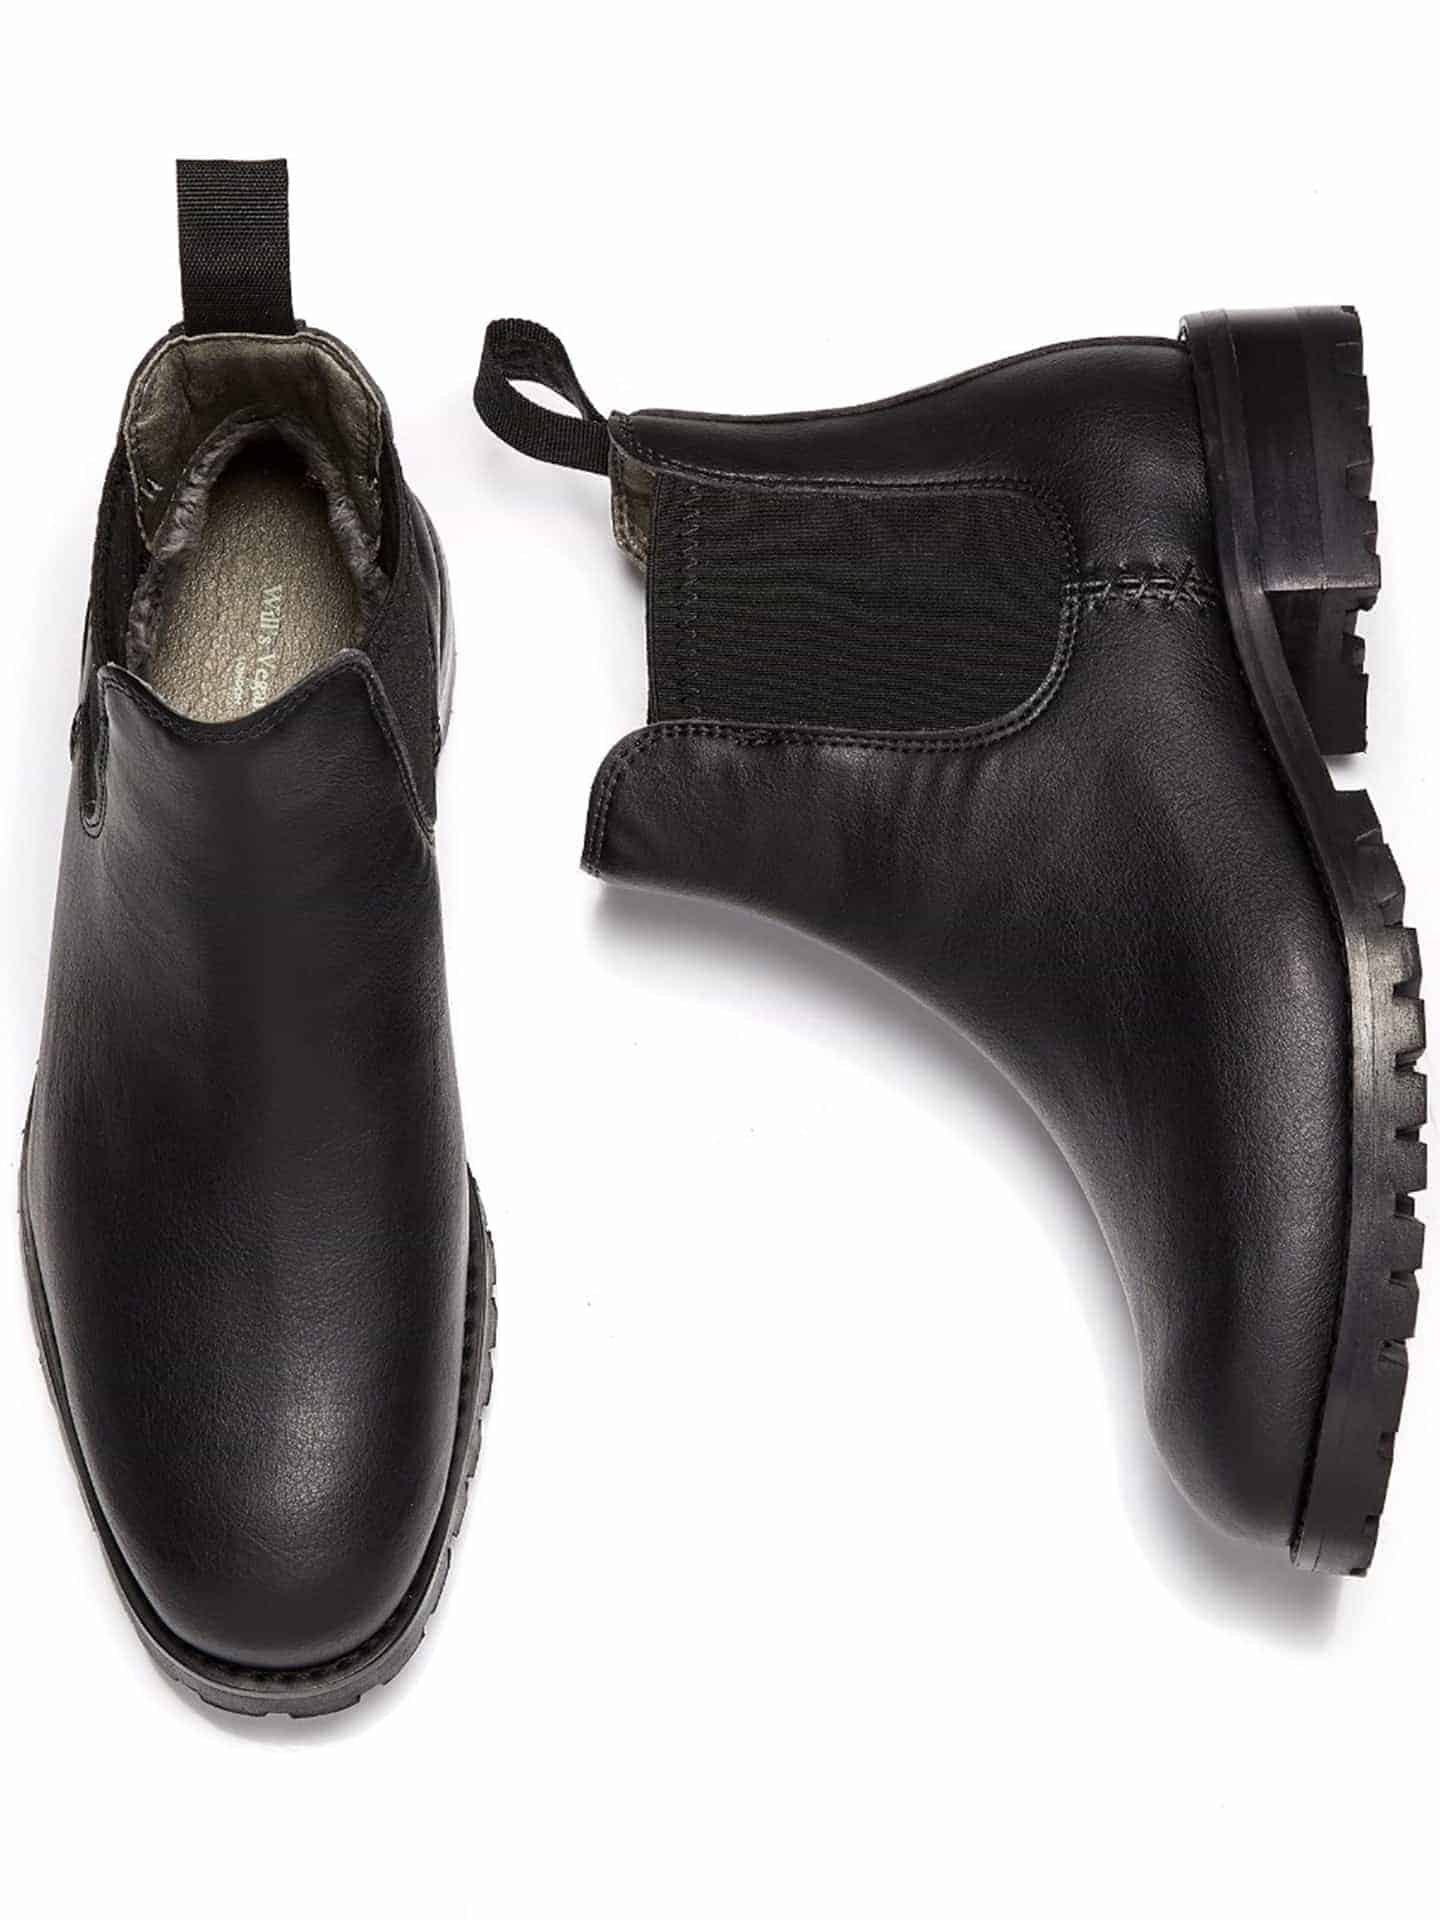 Black vegan Chelsea boots with elasticated panel